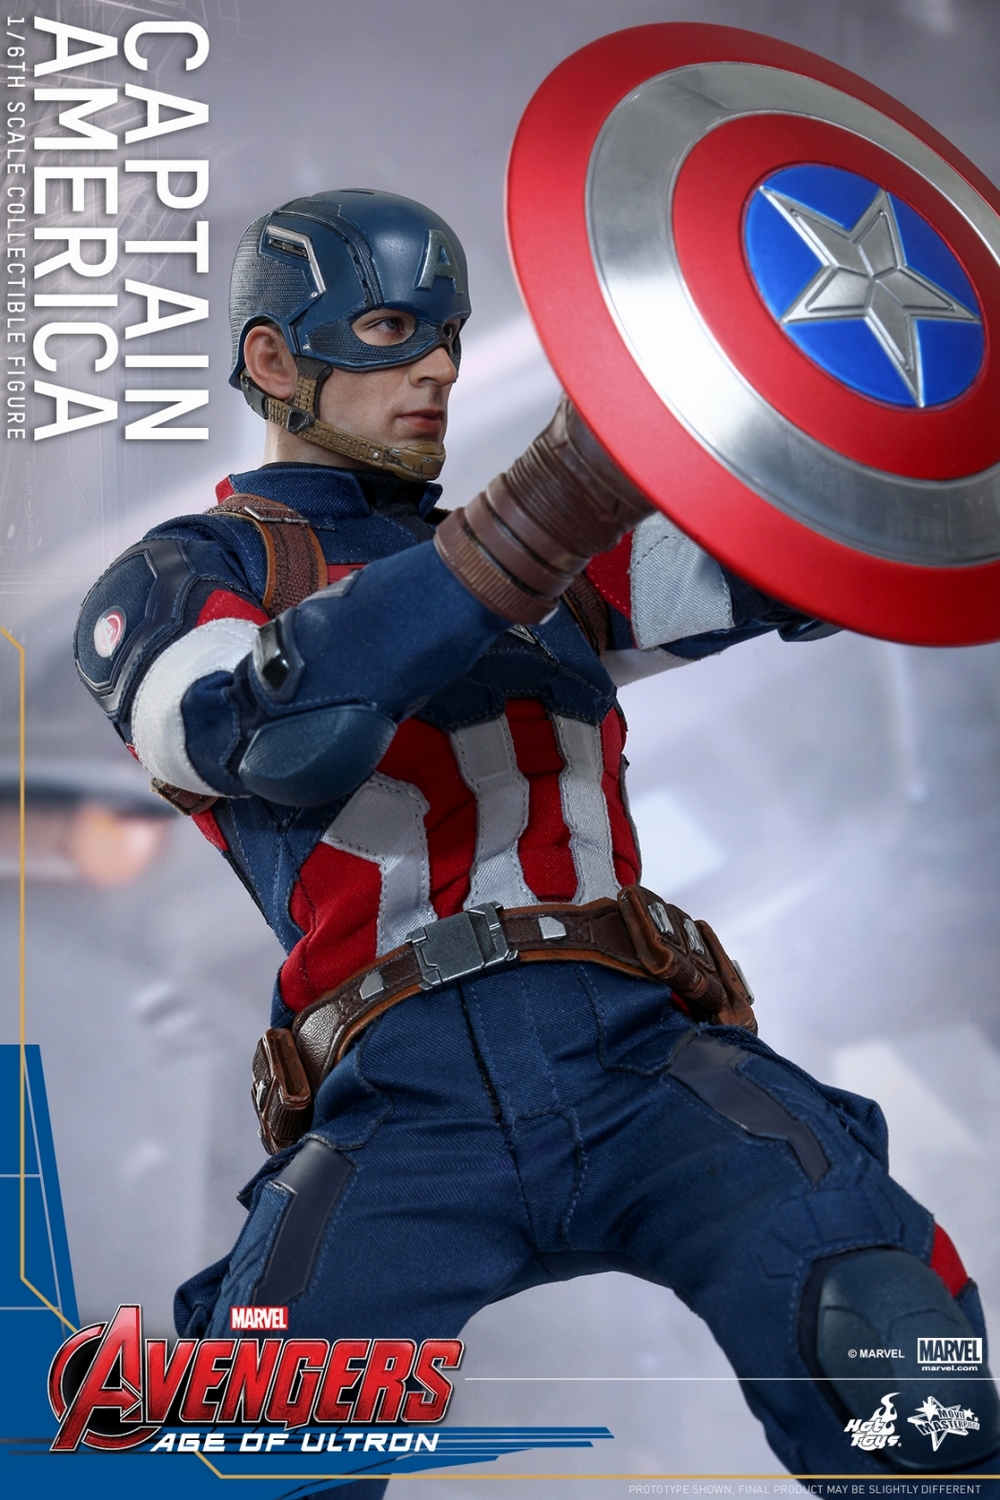 hot-toys-mms281-avengers-age-of-ultron-16th-scale-captain-america-collectible-figure-012315-012.jpg